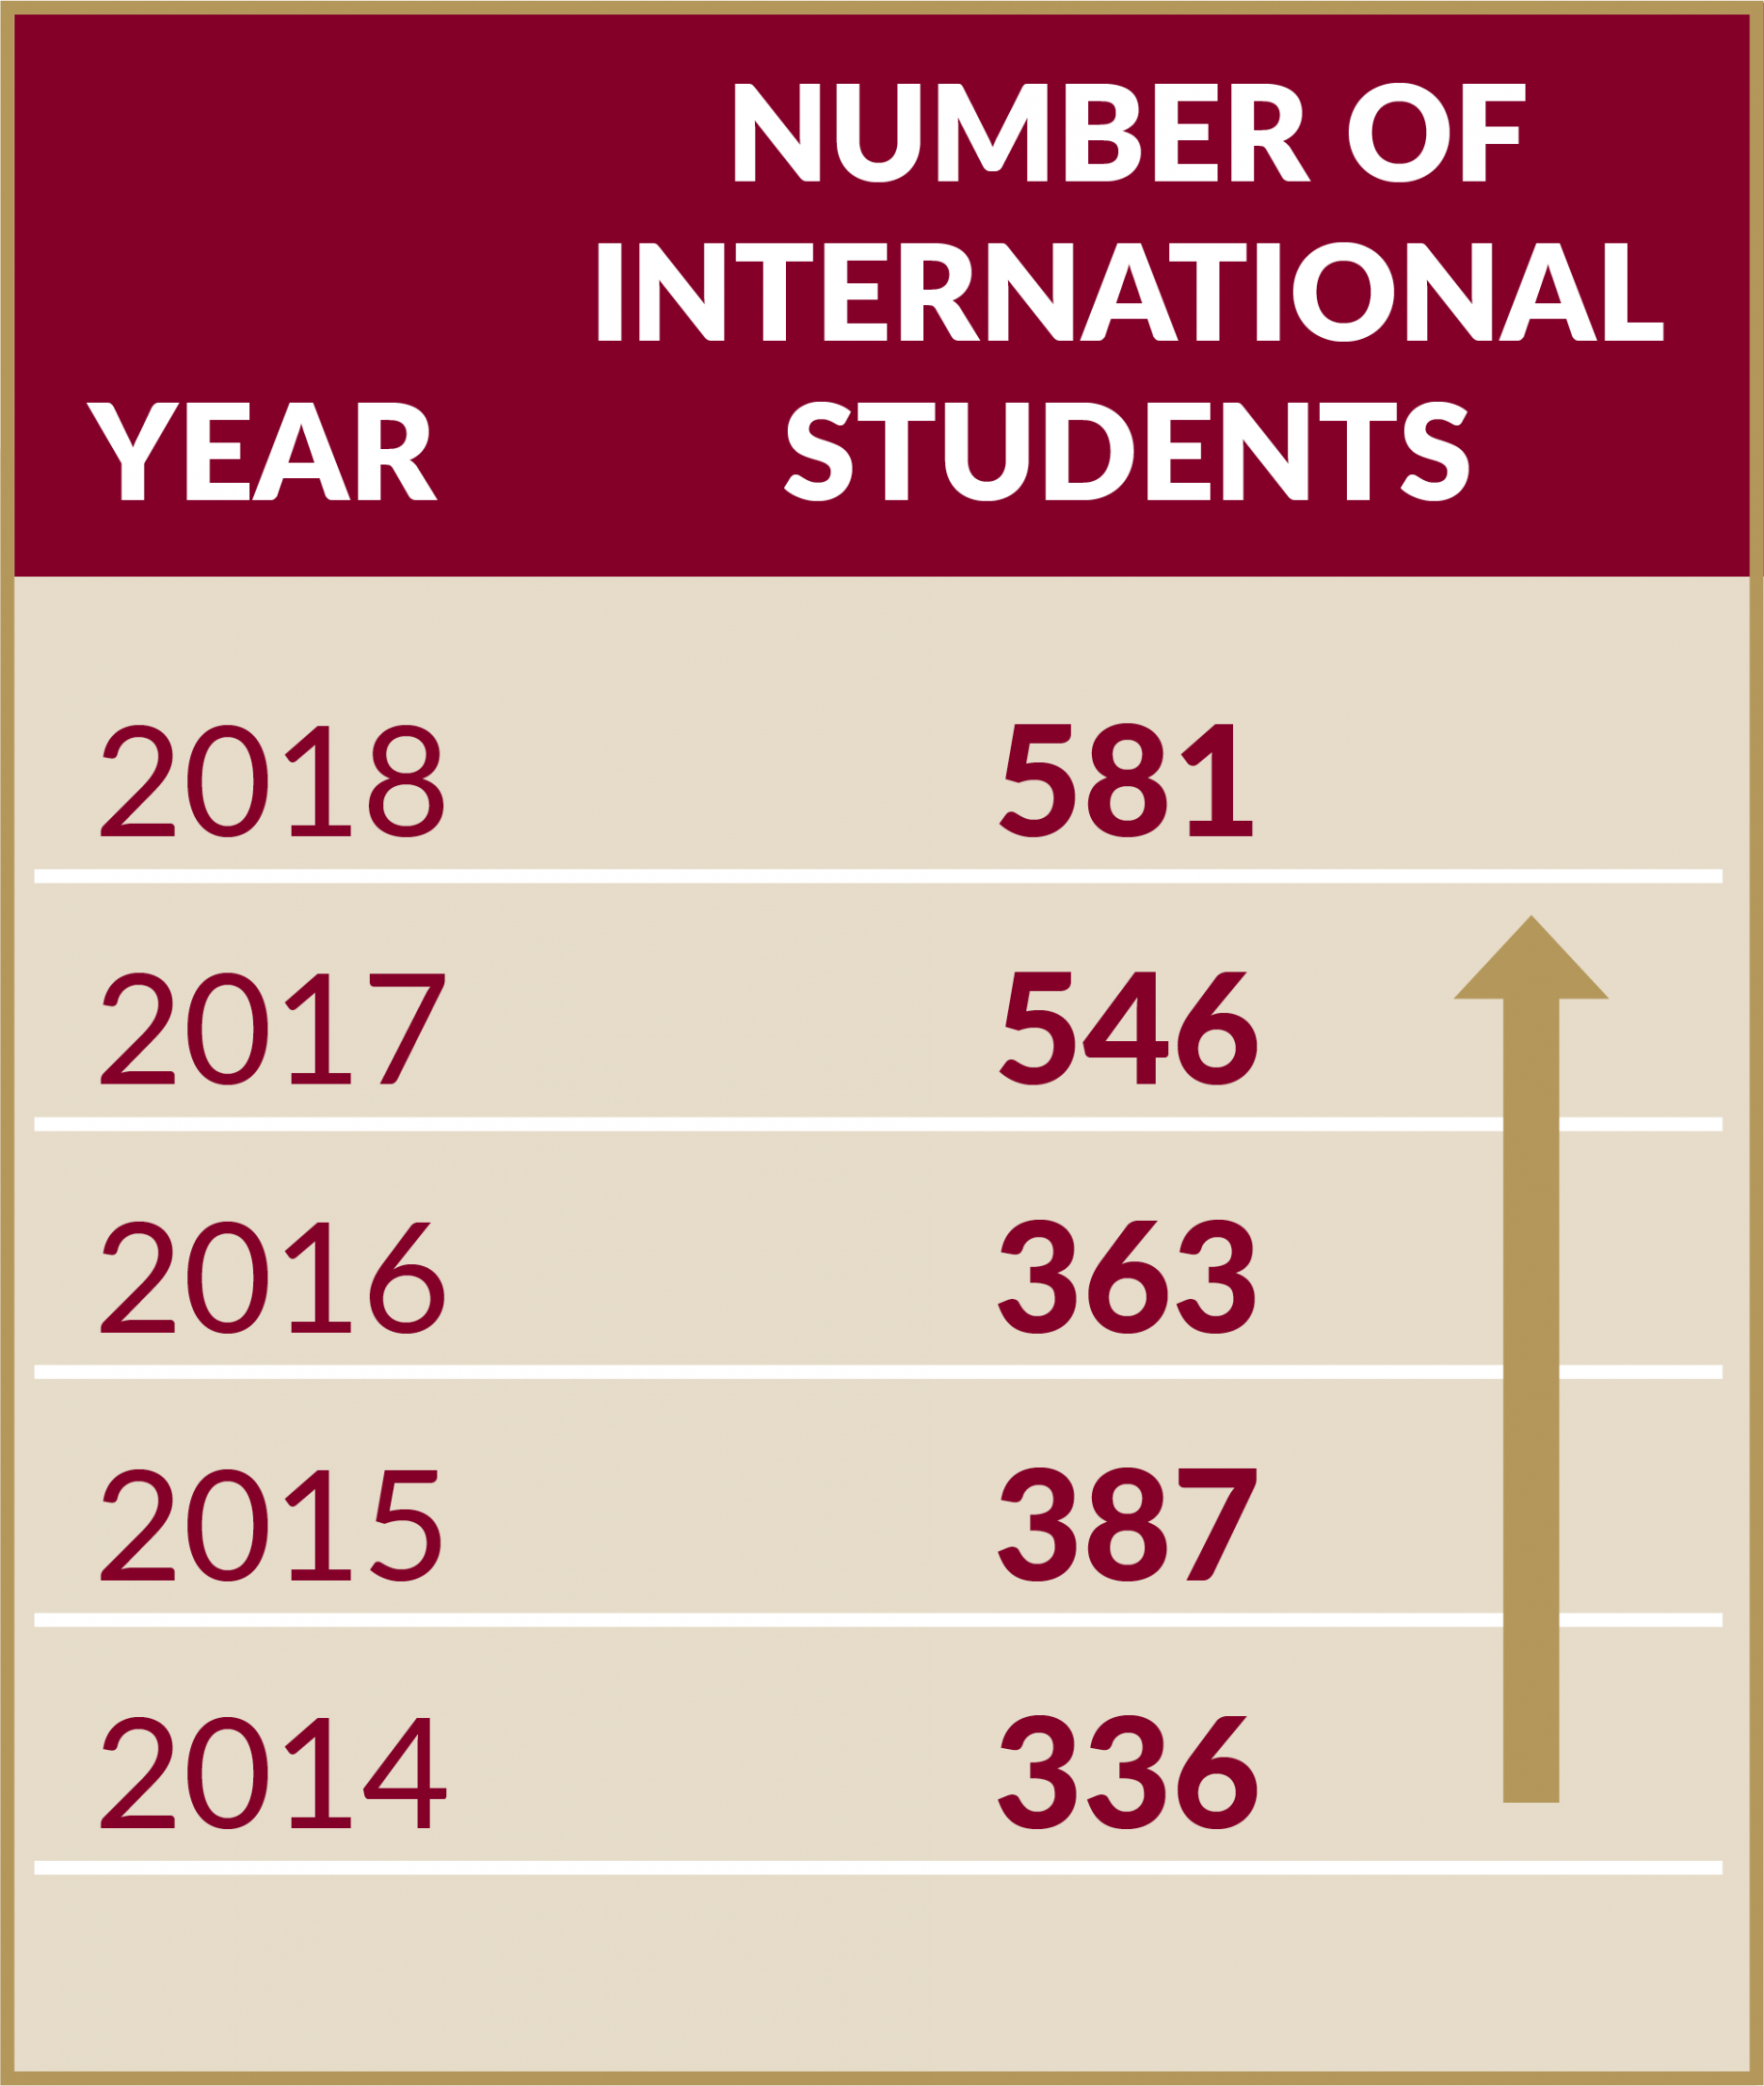 Number of International Students by Year